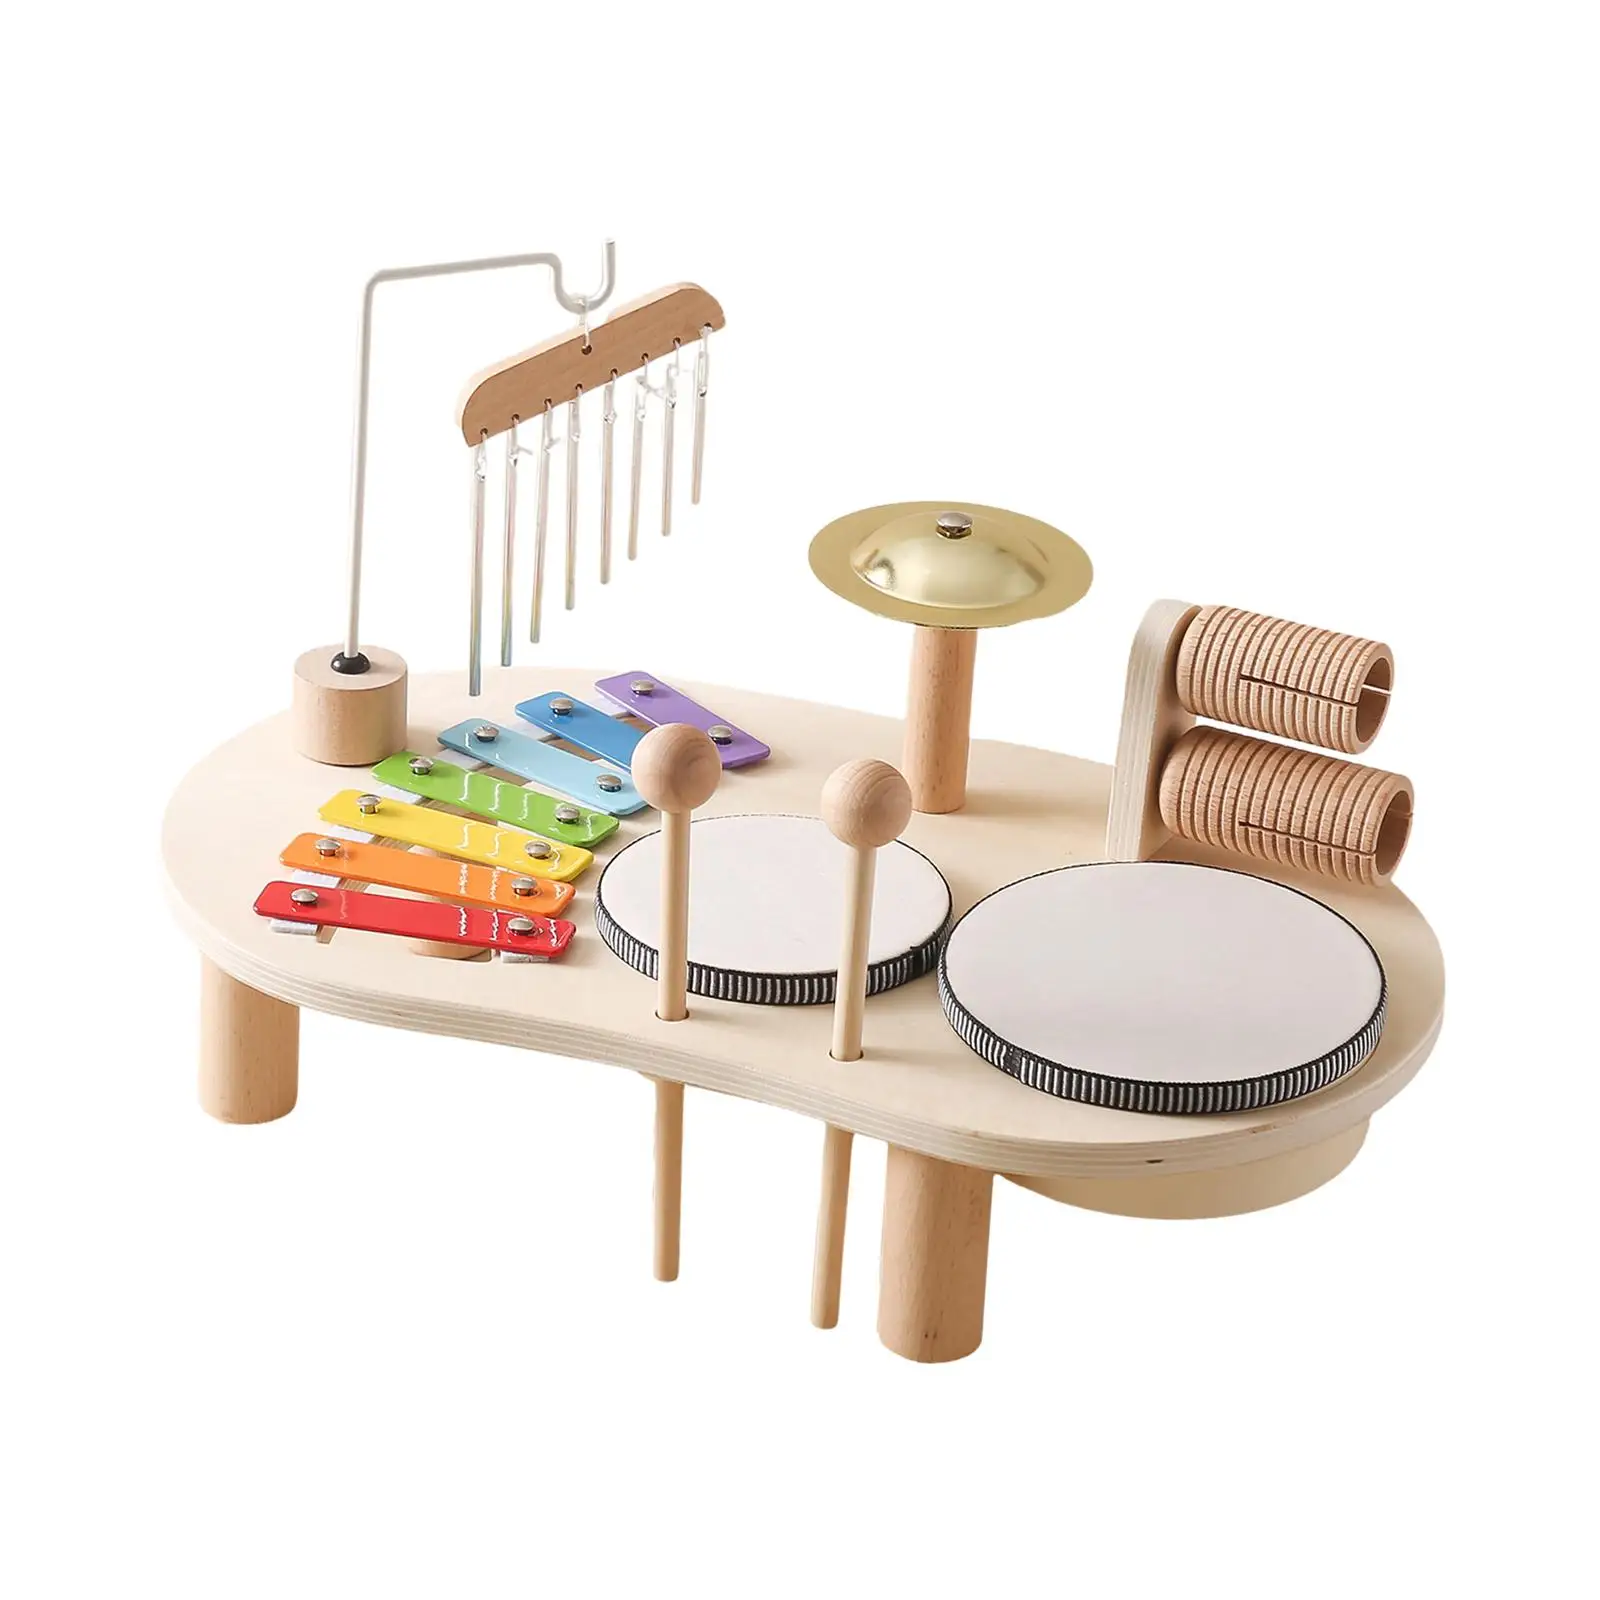 Kids Drum Set Wooden Musical Kits Hand Eye Coordination Musical Instrument Toys Sensory Educational Toys for Children